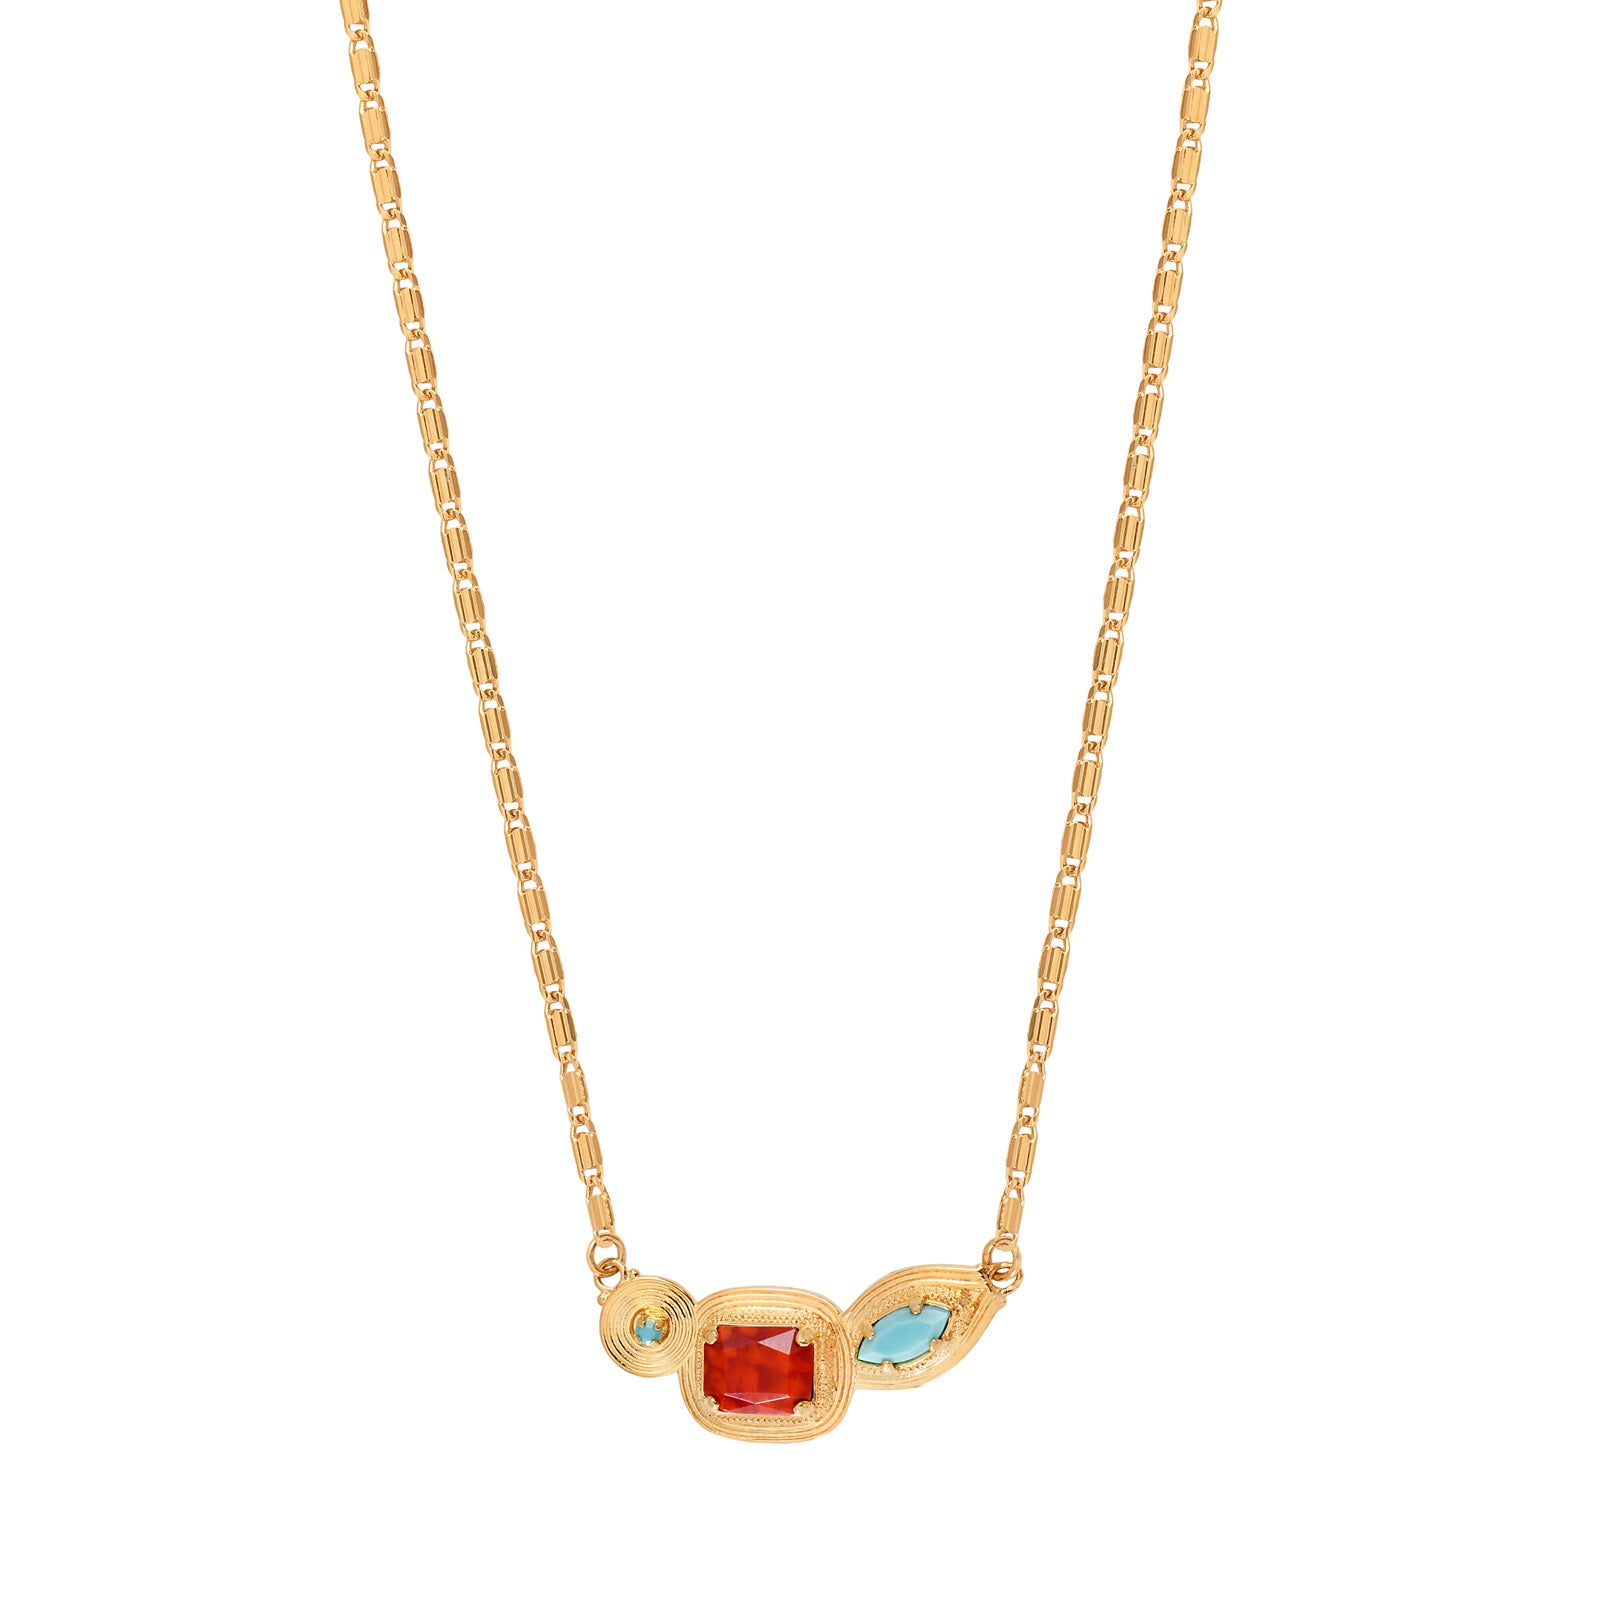 Three shape stone necklace in red